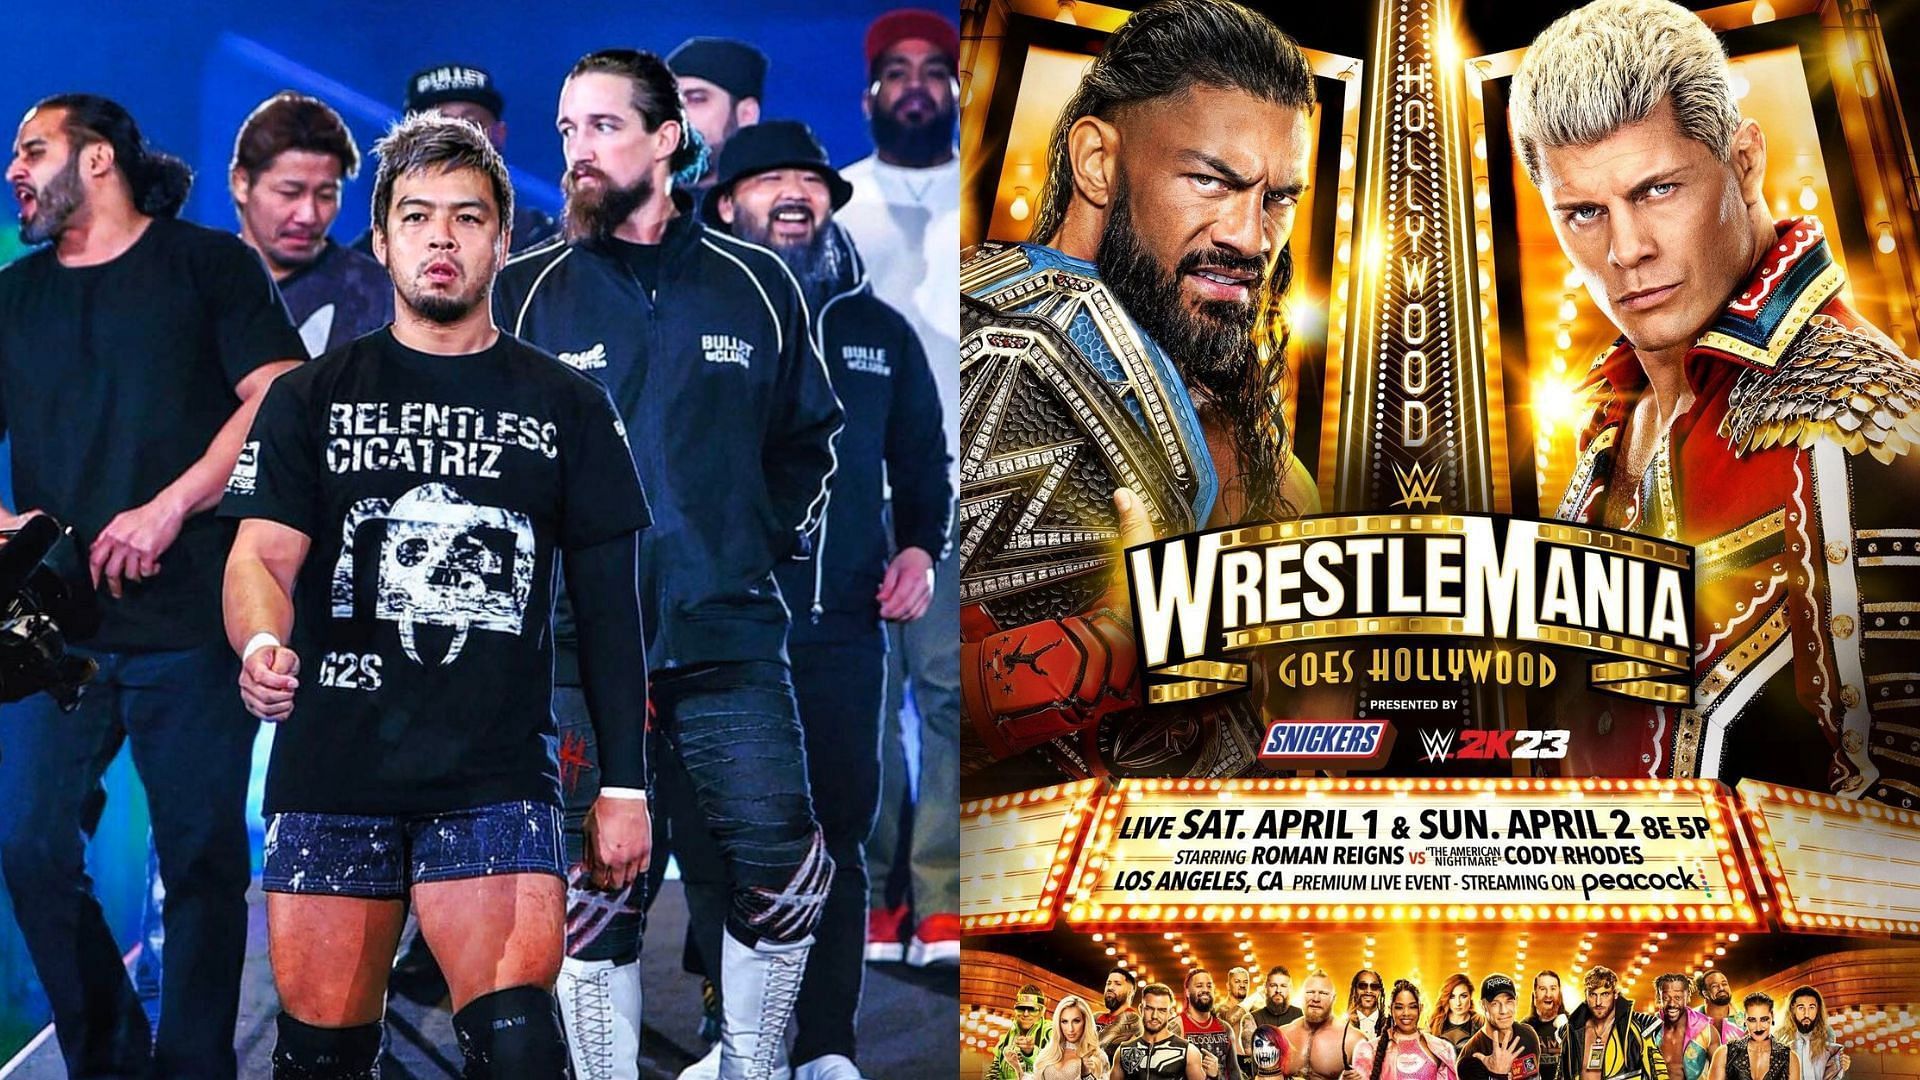 A Bullet Club member has called out a WWE star and CM Punk